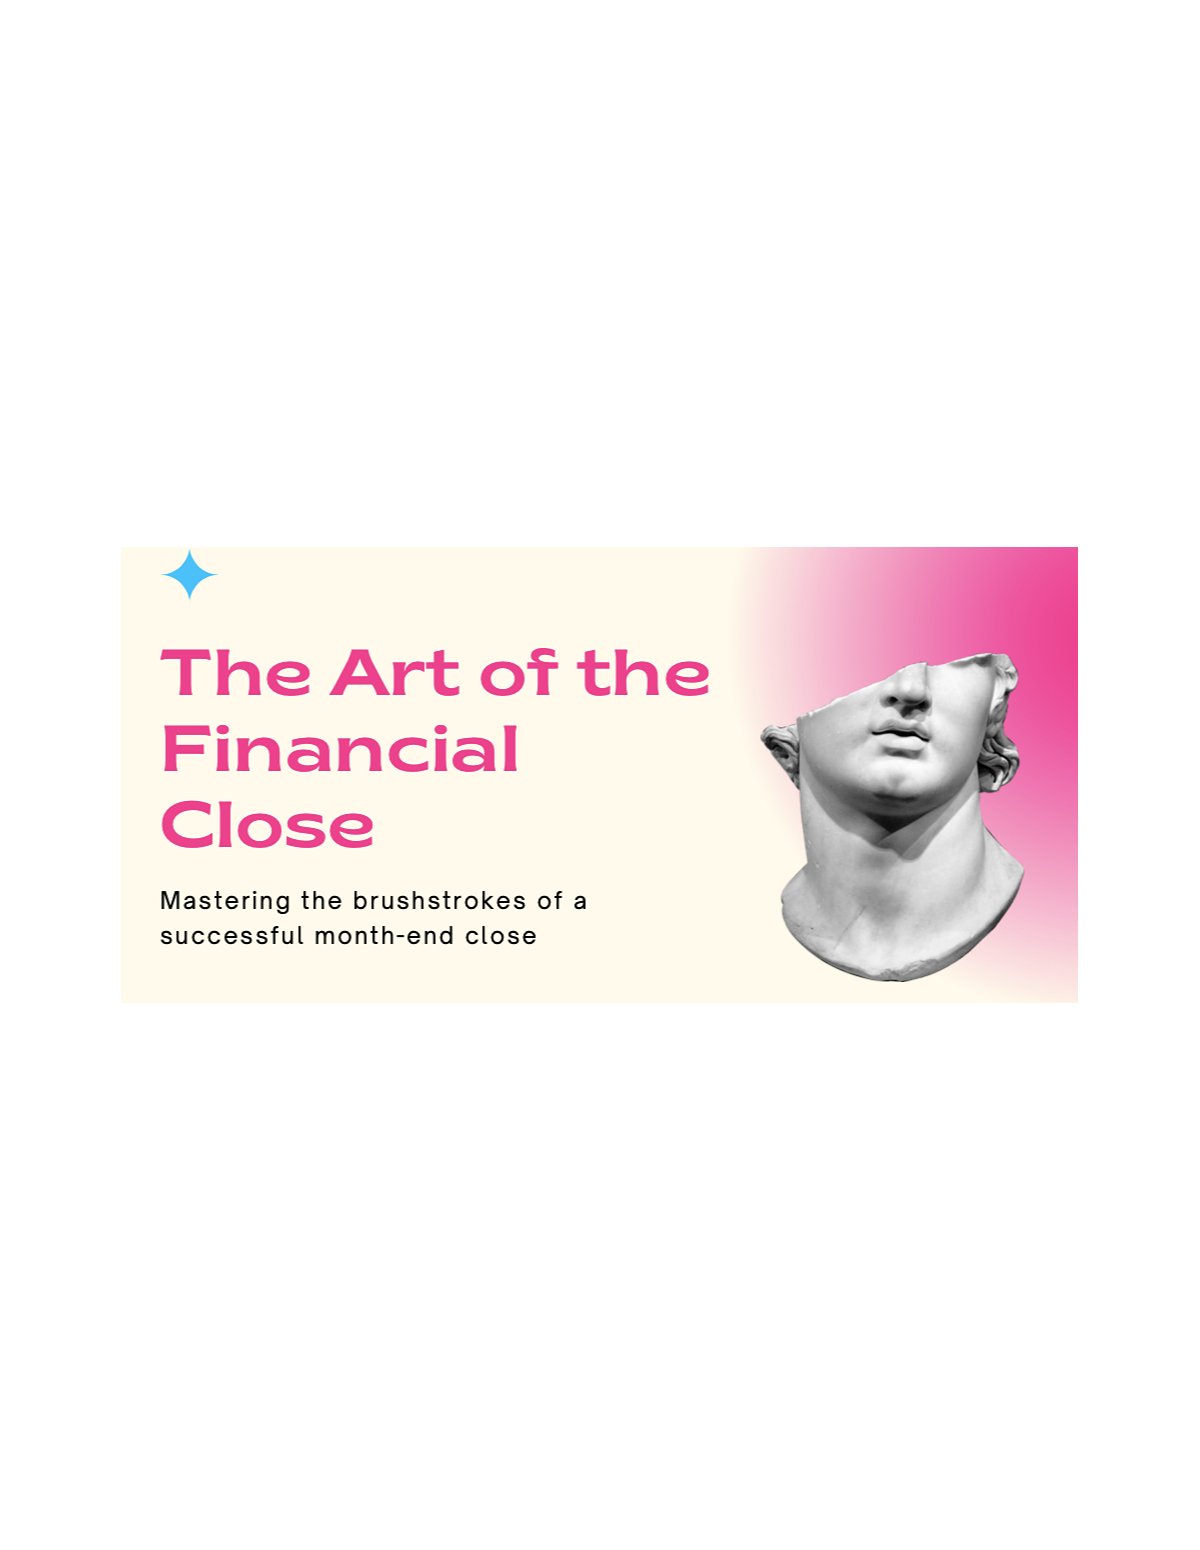 The ART of the Financial Close